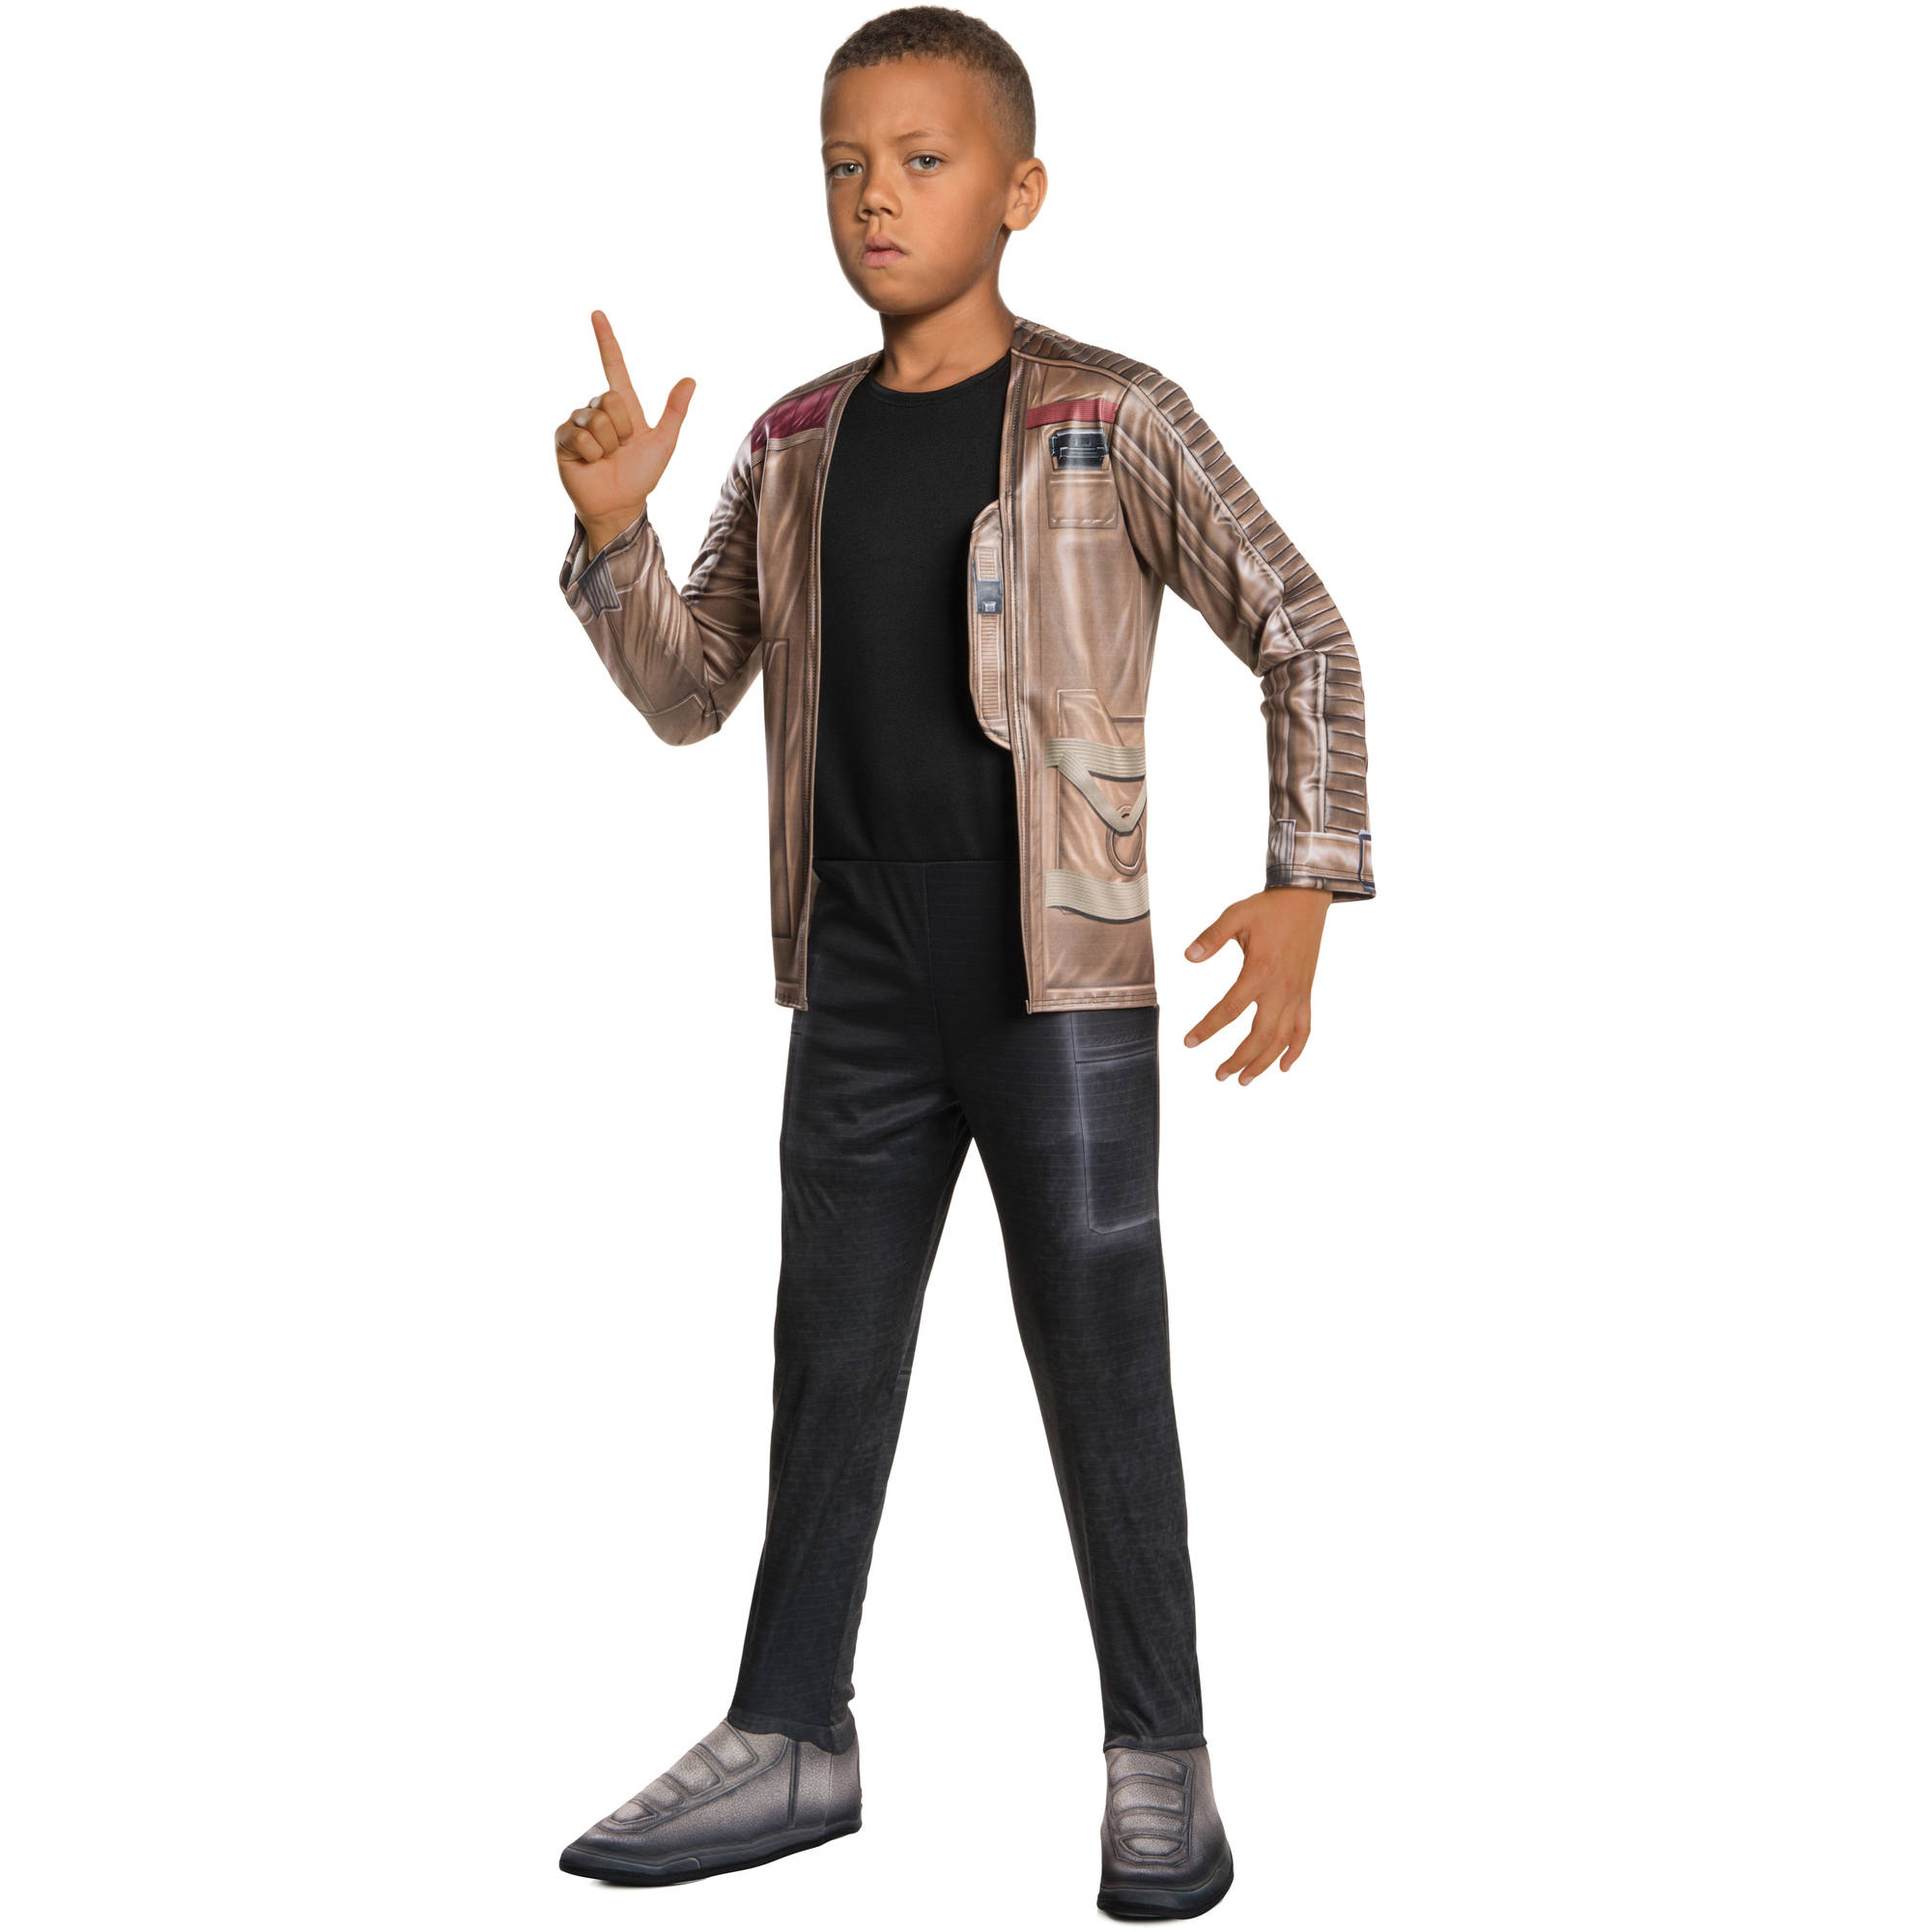 Star Wars Episode 7 Finn Child Halloween Dress Up / Role Play Costume - image 1 of 1